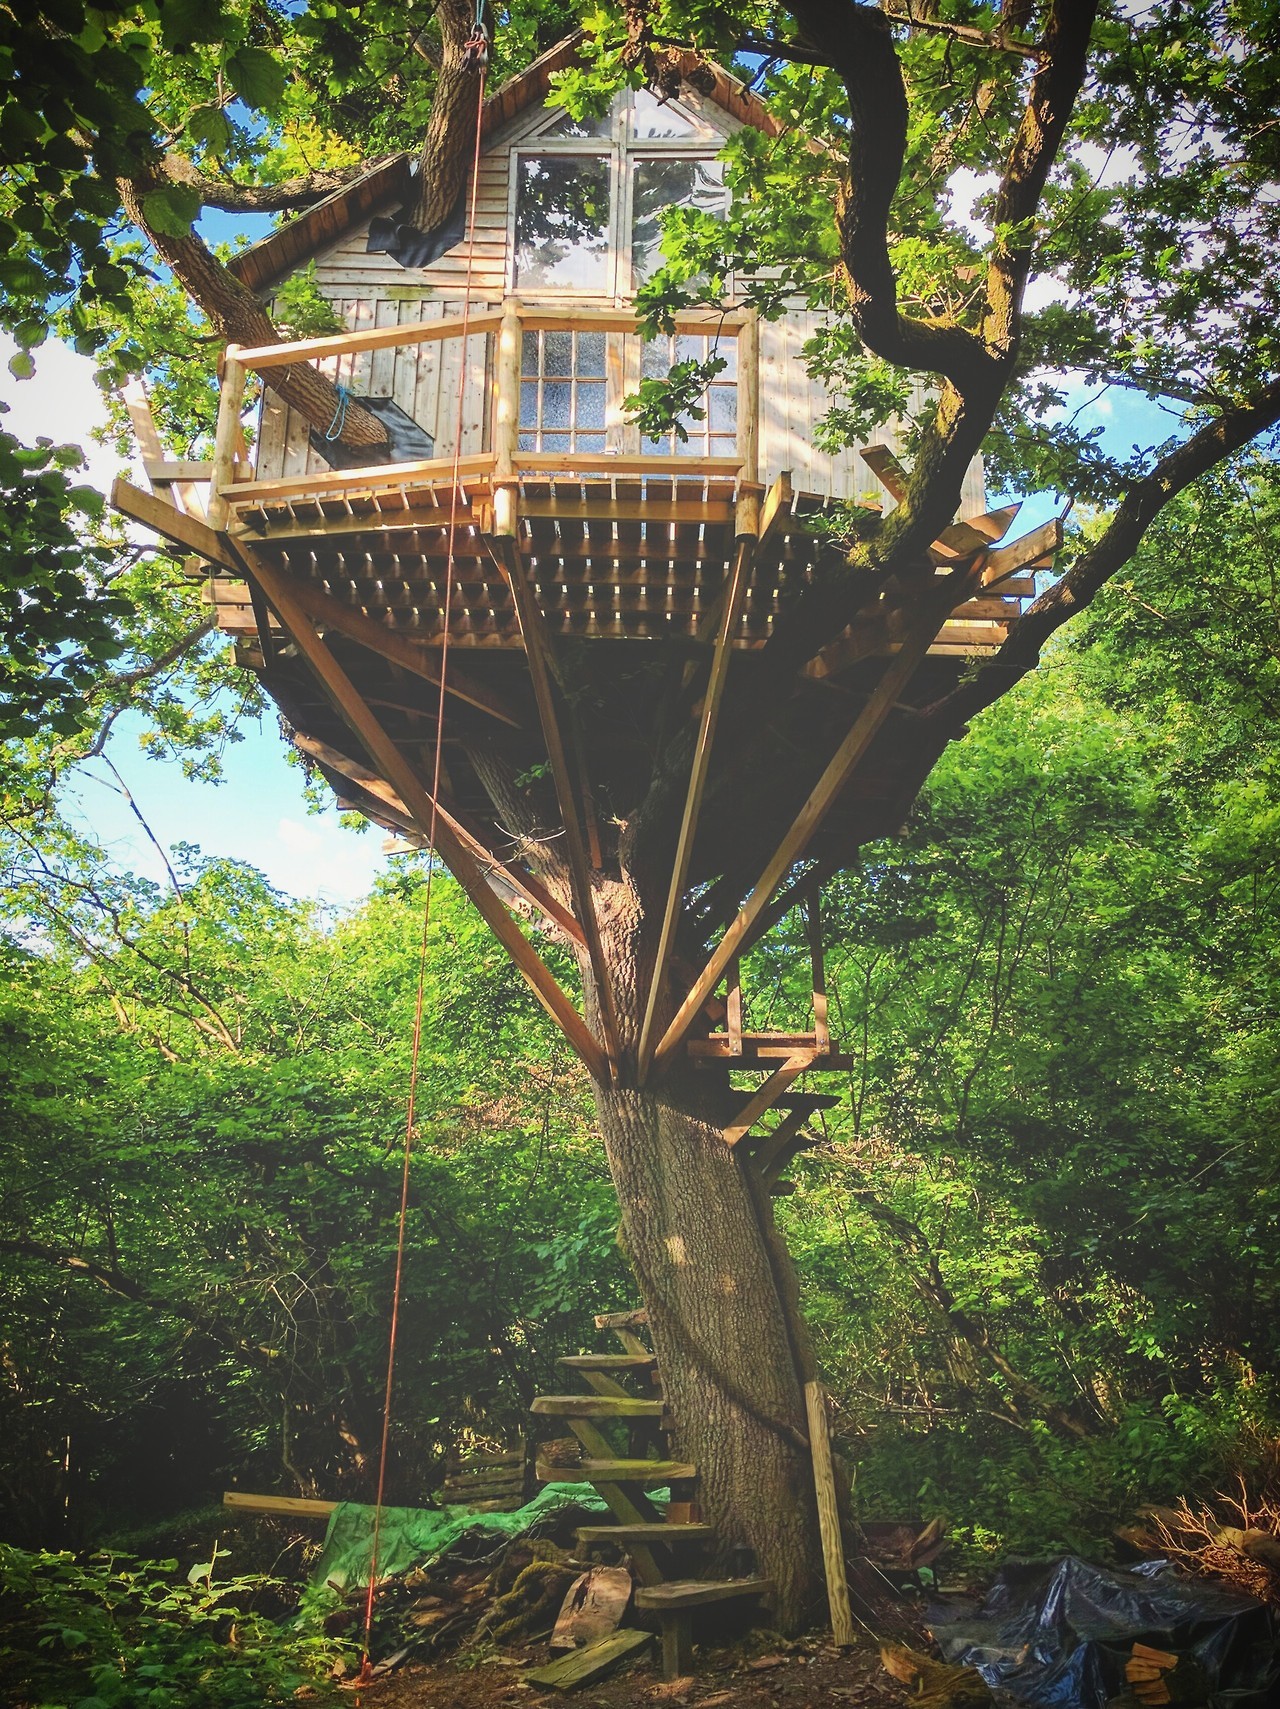 Treehouse, Oxford, England
Built by Tom de Wilton / @tomdewilton
“I built my treehouse in the woods on my grandma’s farm when I was 18. I used my summer job money to buy the structural timbers, bolts and a couple of hand tools — and managed to...